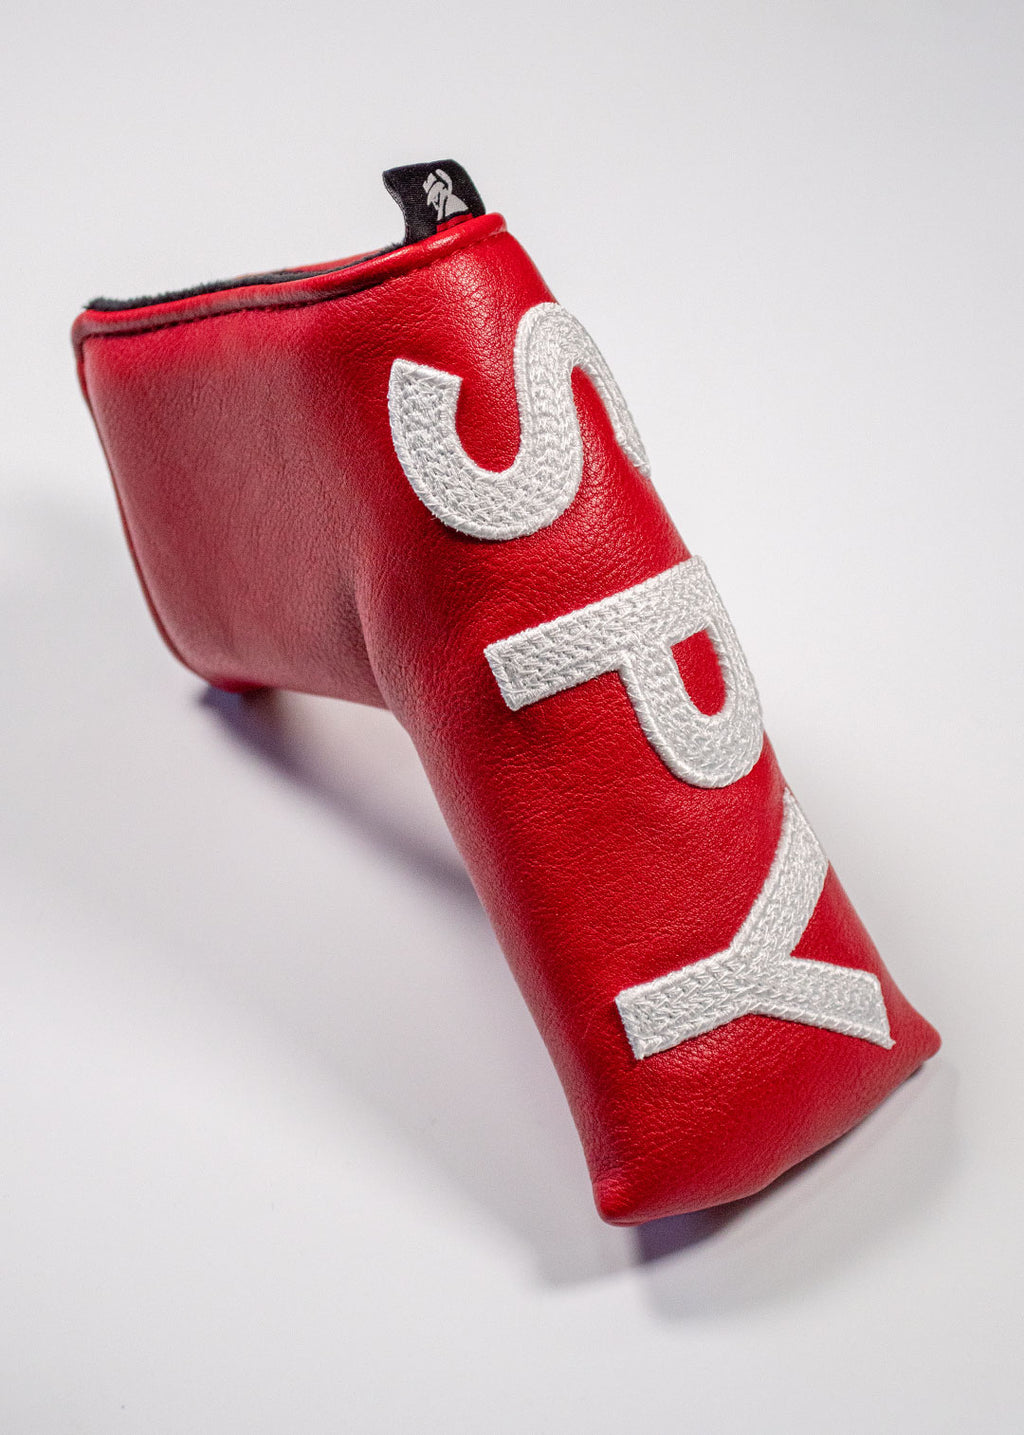 Spy Collection Putter Cover